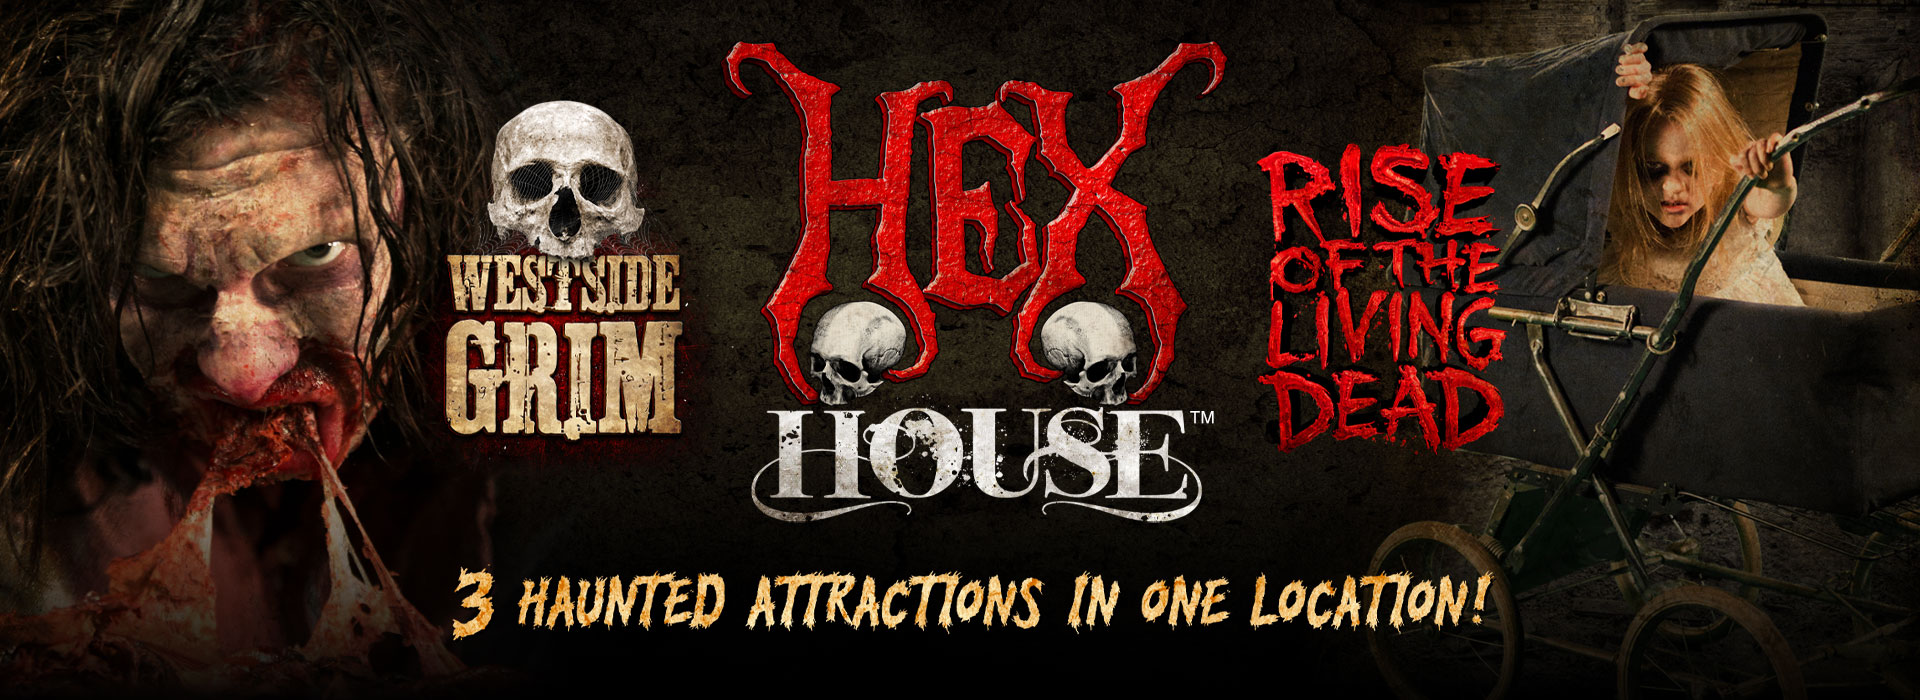 3 haunted attractions